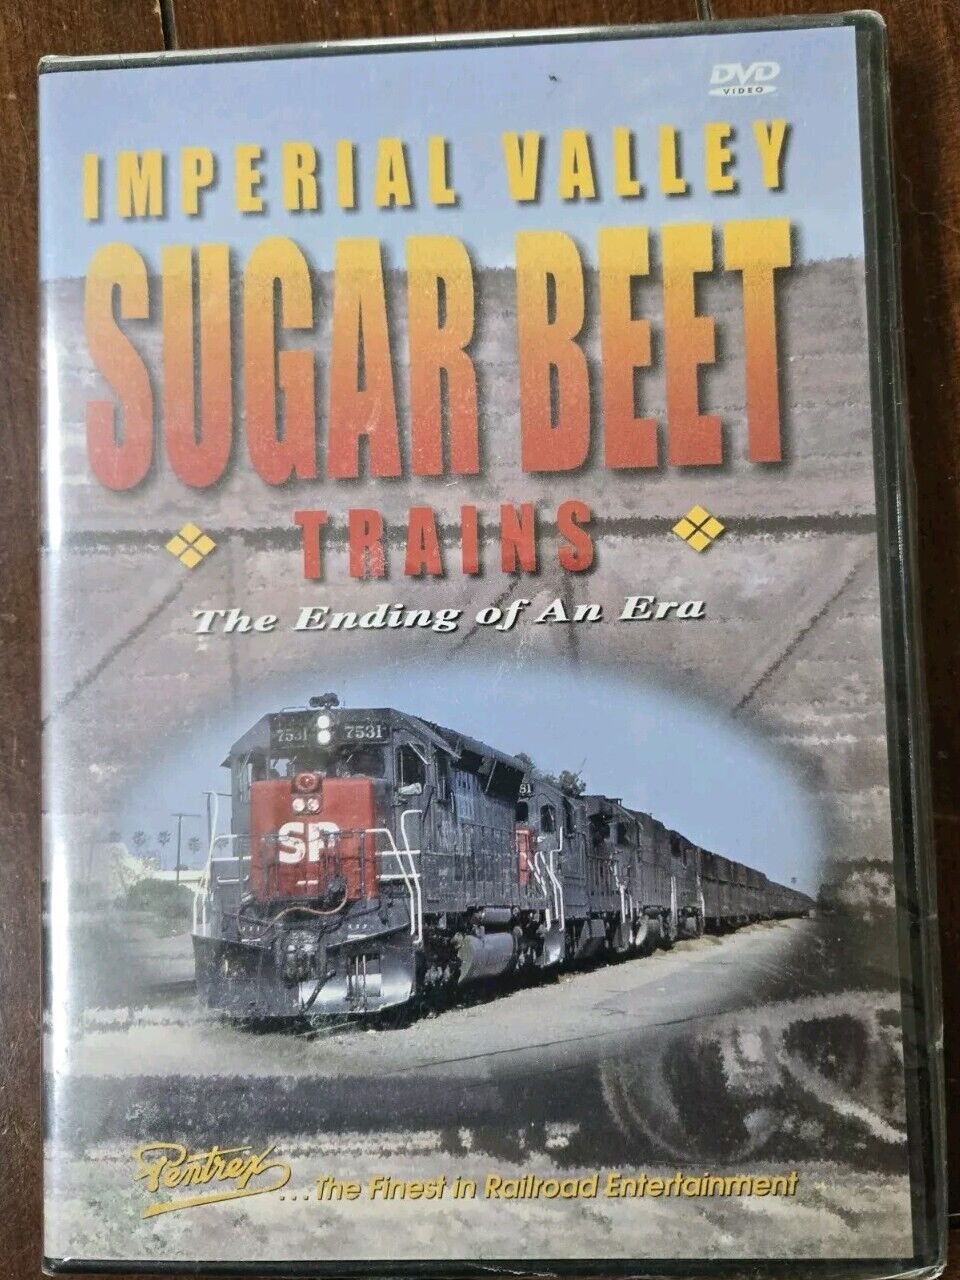 Imperial Valley Sugar Beat Trains Dvd